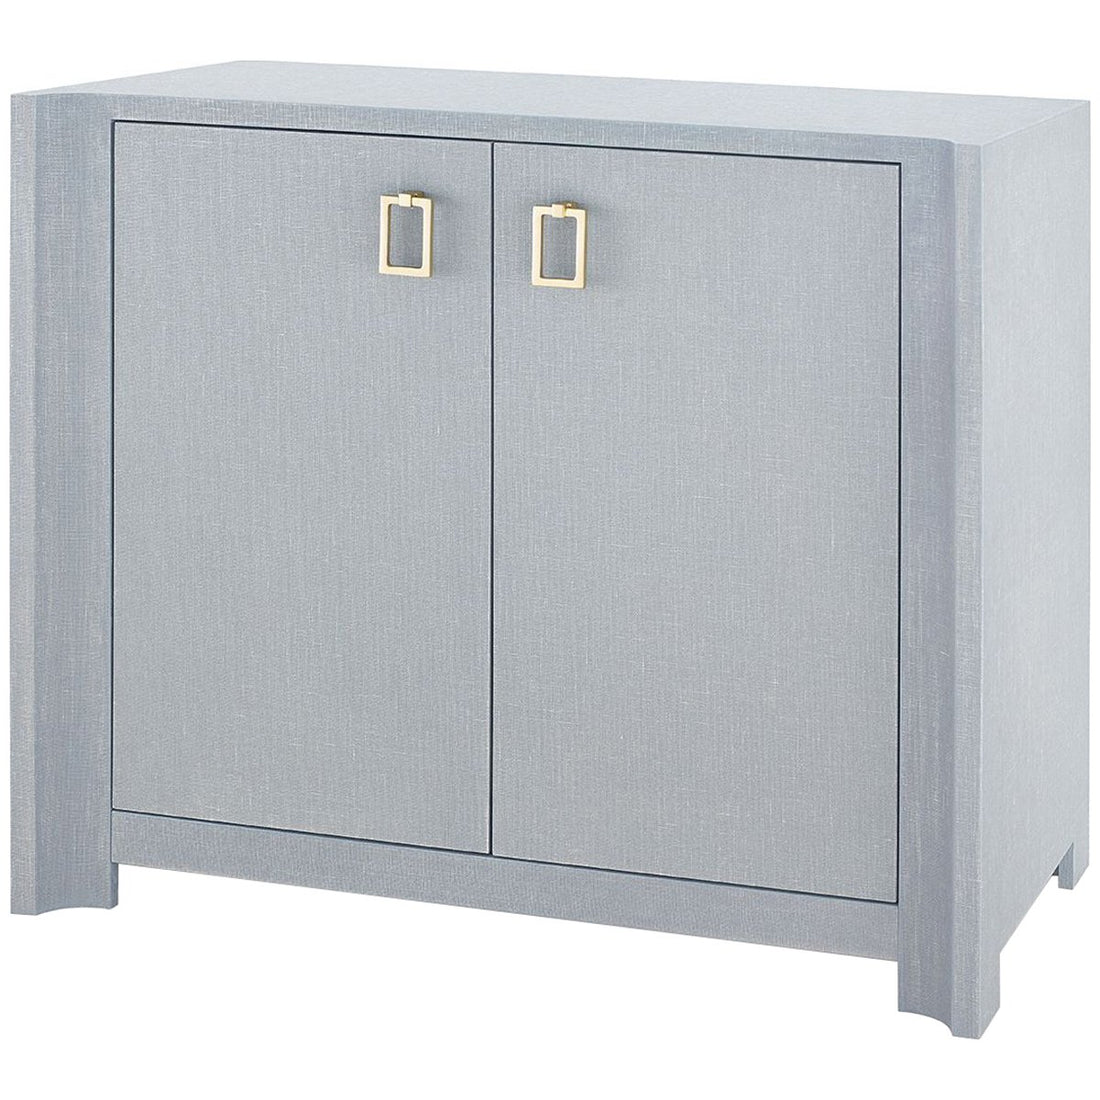 Villa & House Audrey Cabinet with Raquel Pull